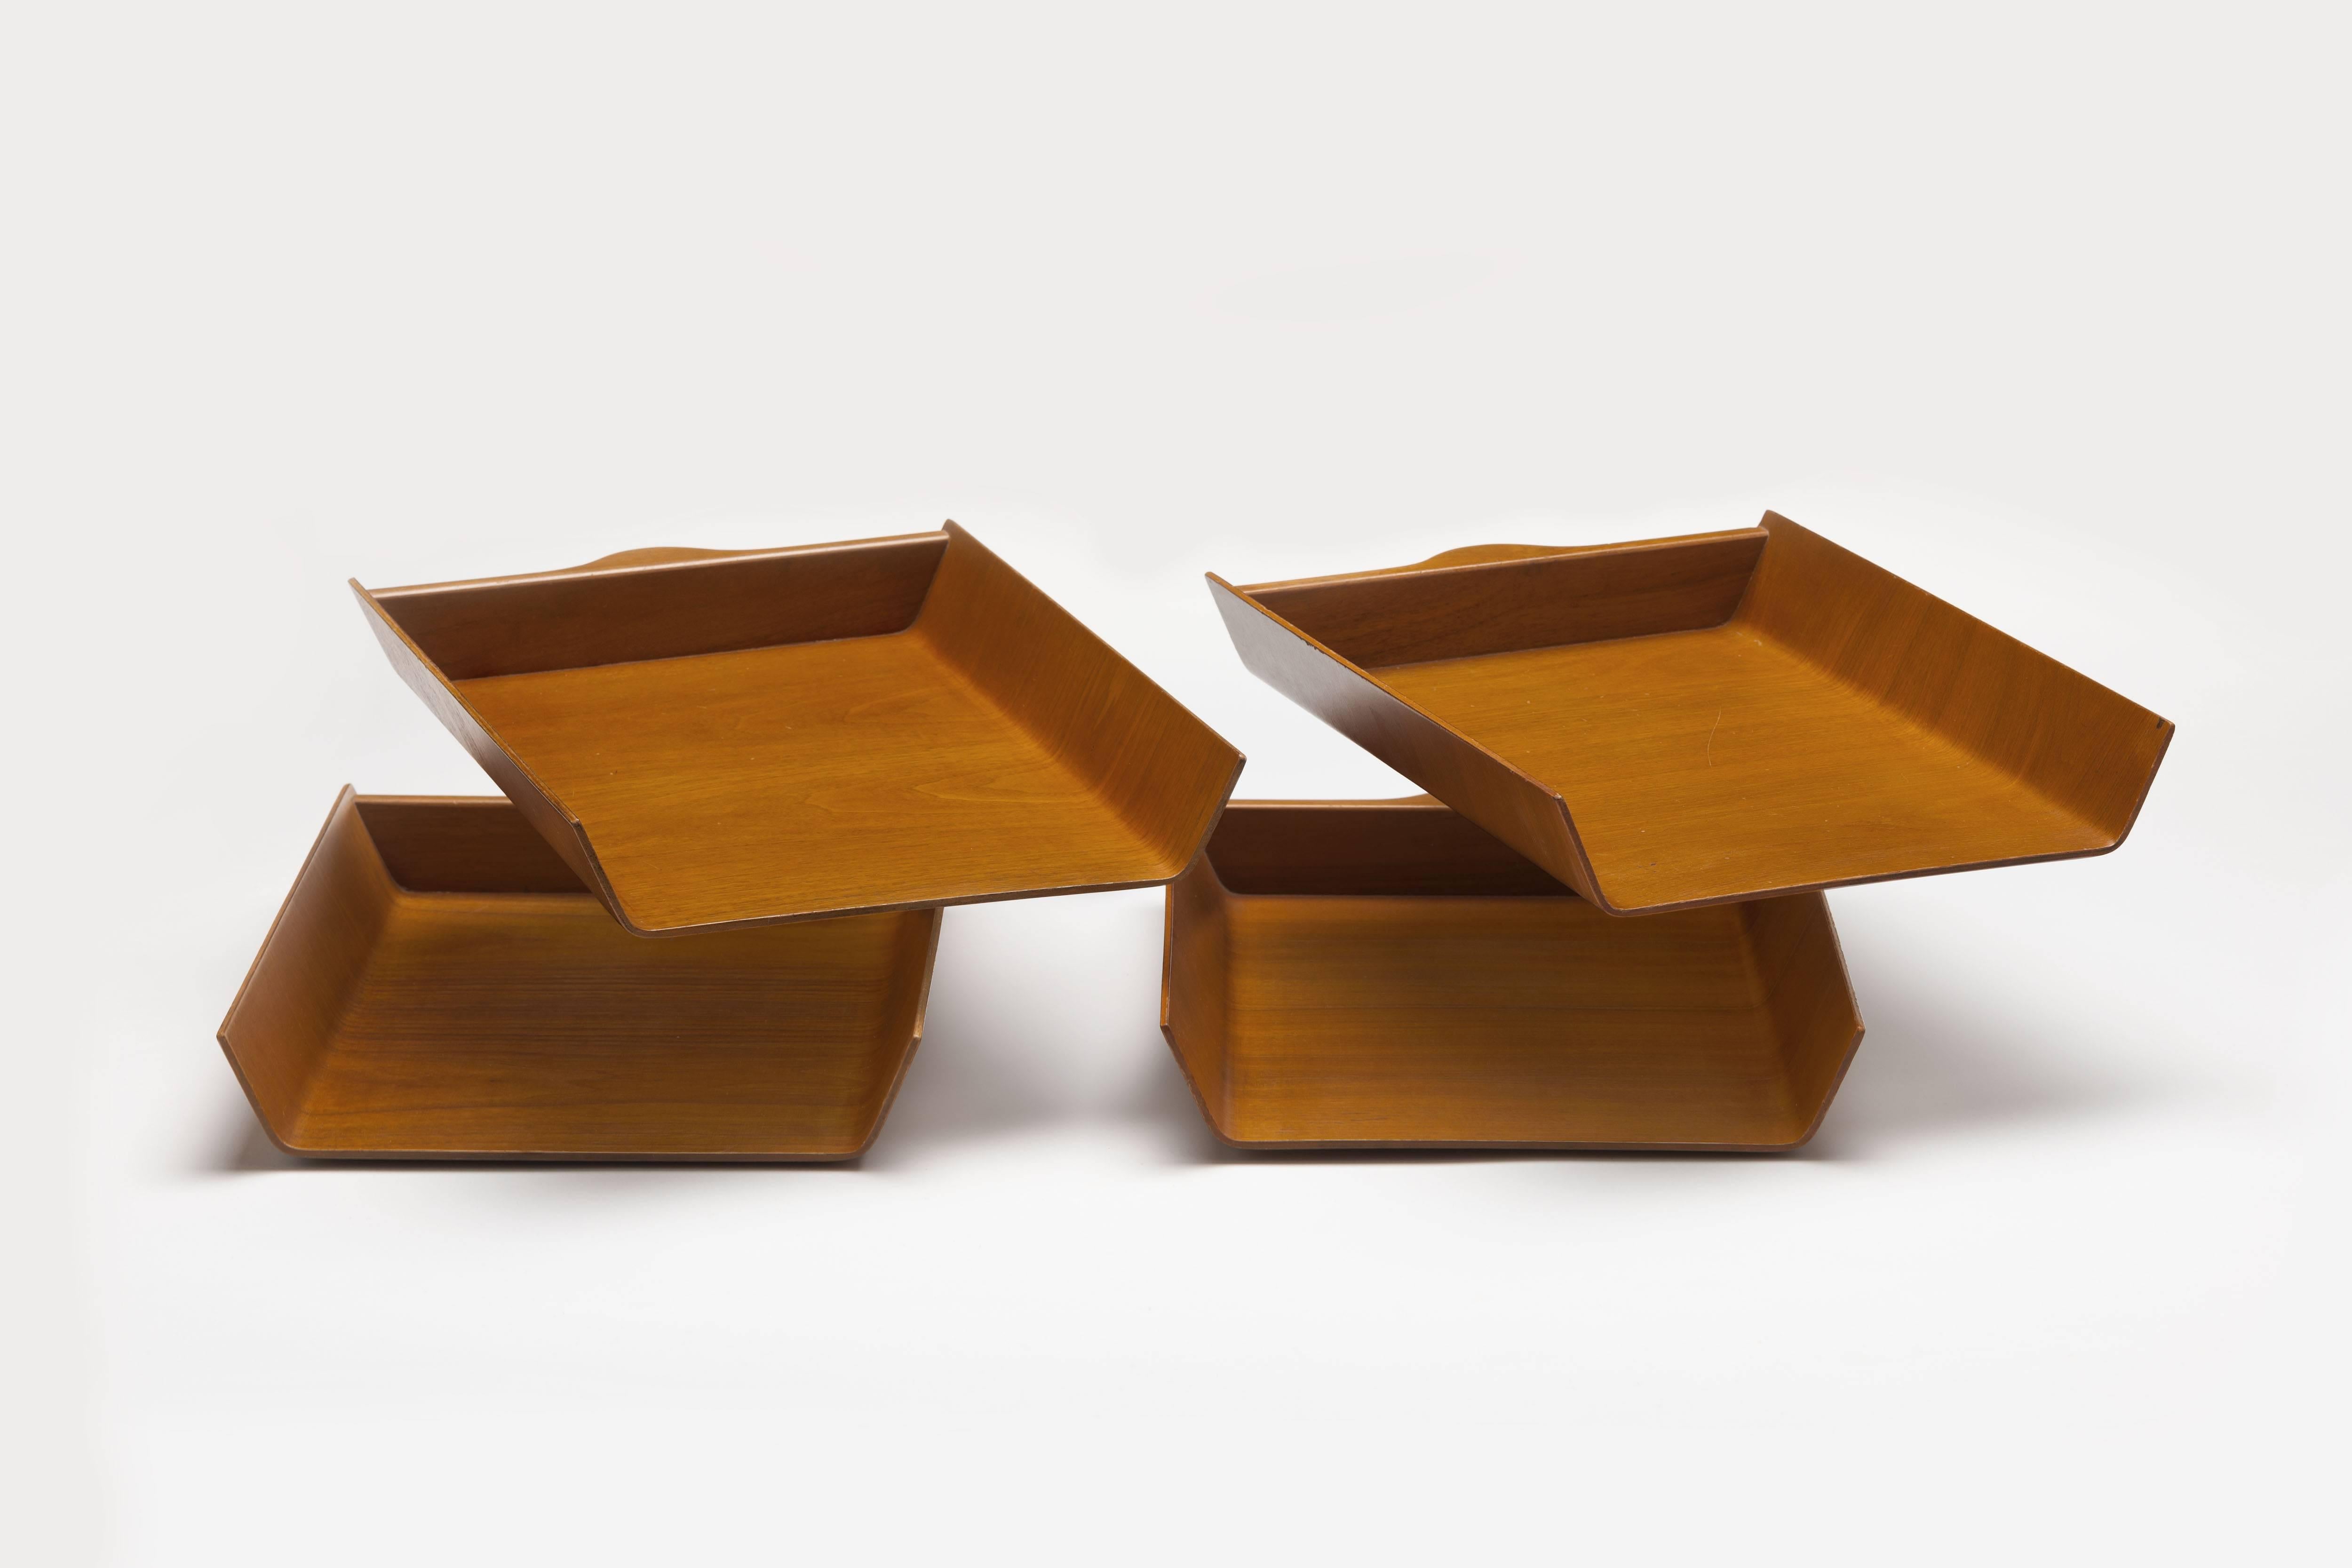 Pair of early 1950s teak plywood molded letter desk tray's by Florence Knoll.
Each individual tray comes with an original early 1950s Knoll label (see last photo).
These tray's have been exceptionally well preserved since they have been stored for